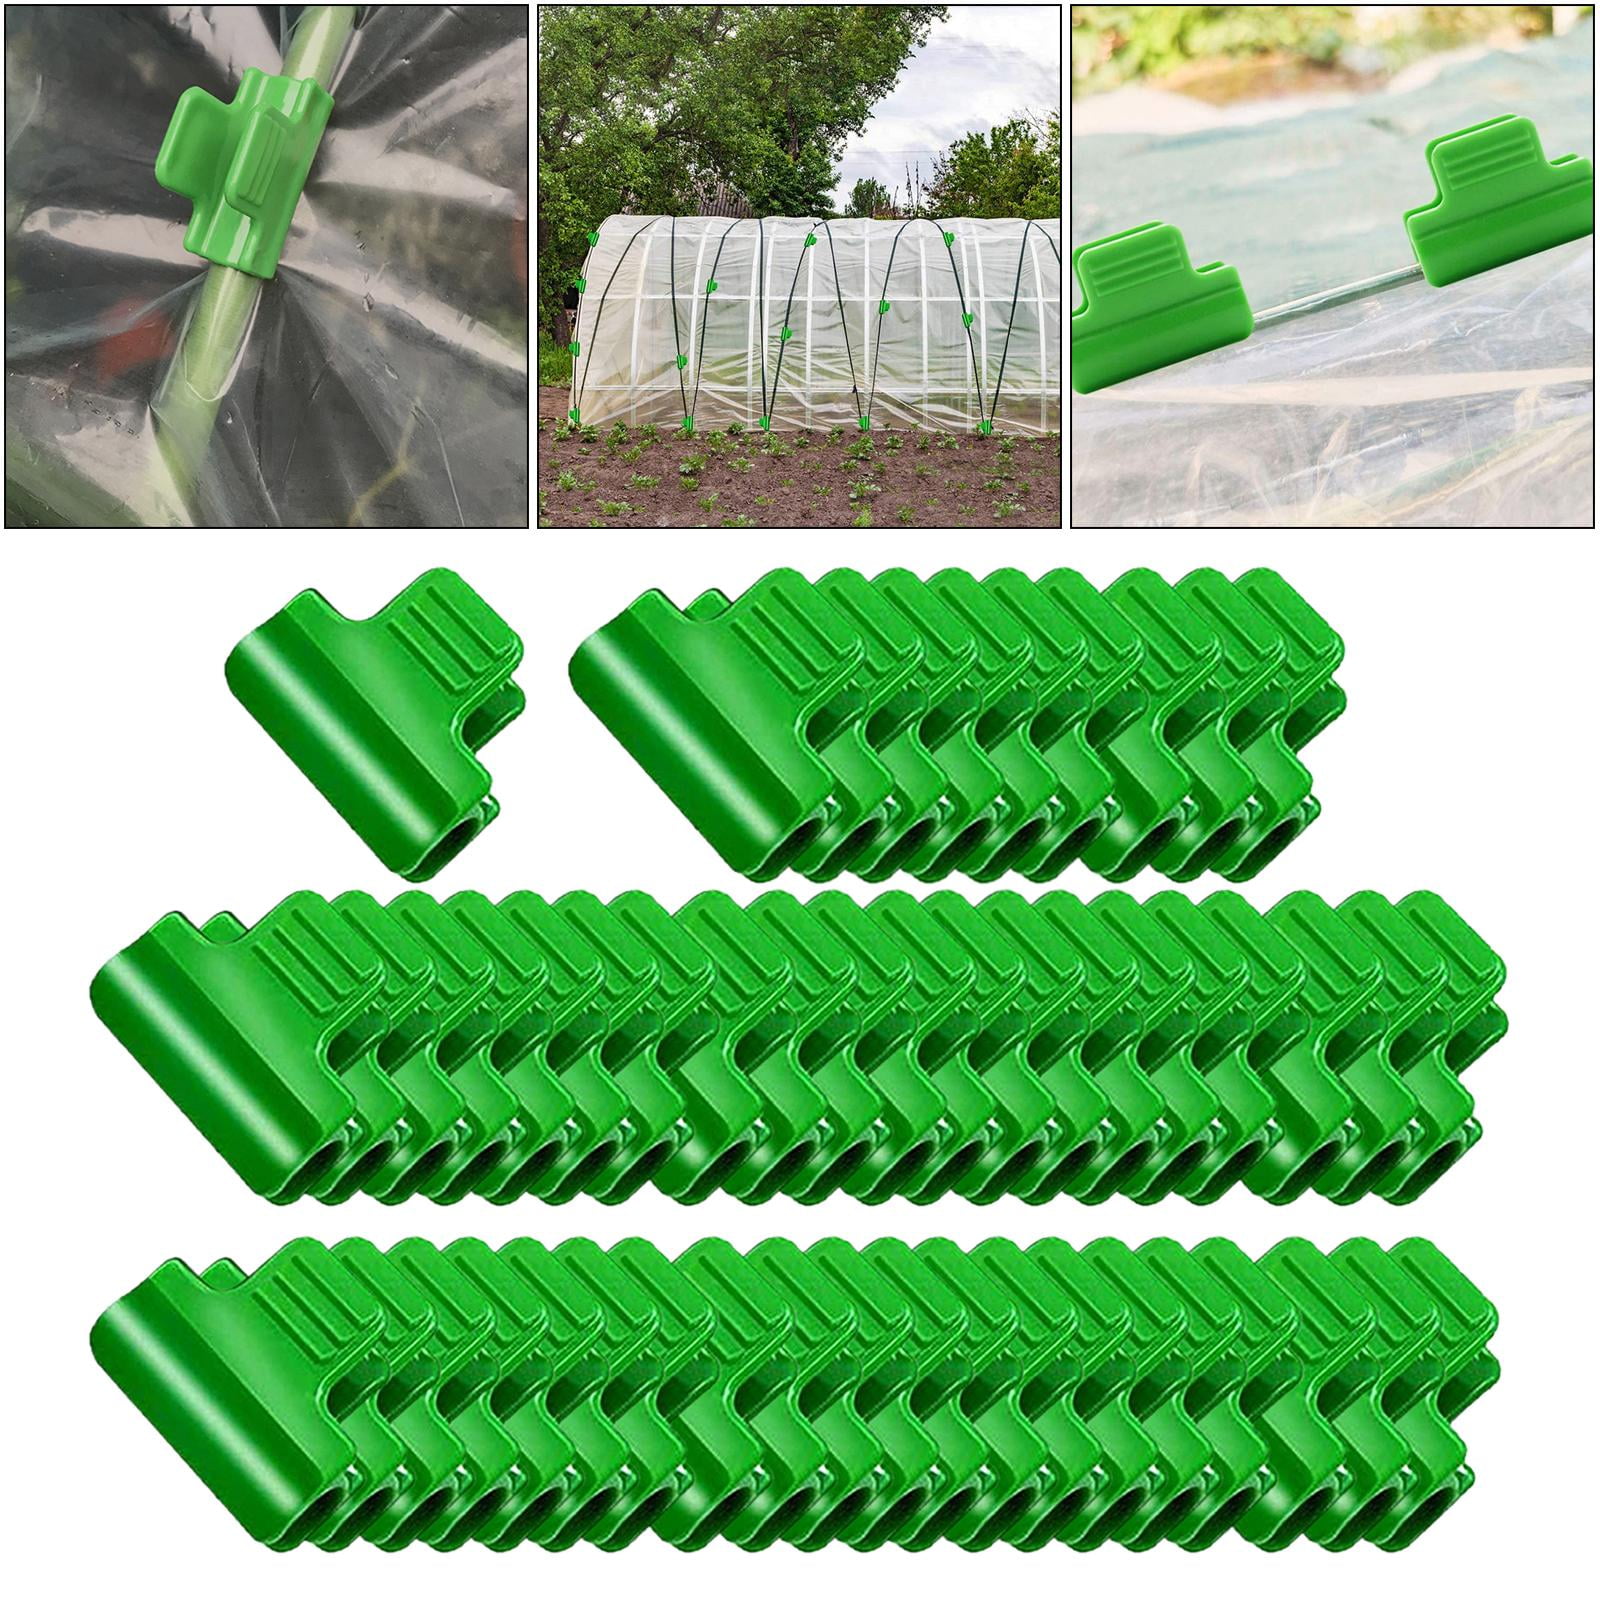 Greenhouse Clamps Clips 50Pcs Garden Hoop Clips Shed Film Shading Net Rod Clip Floor Coverings Netting Tunnel Hoop Plastic Clip fits for 11mm/0.43 inch Round Tube or Plant Stakes 